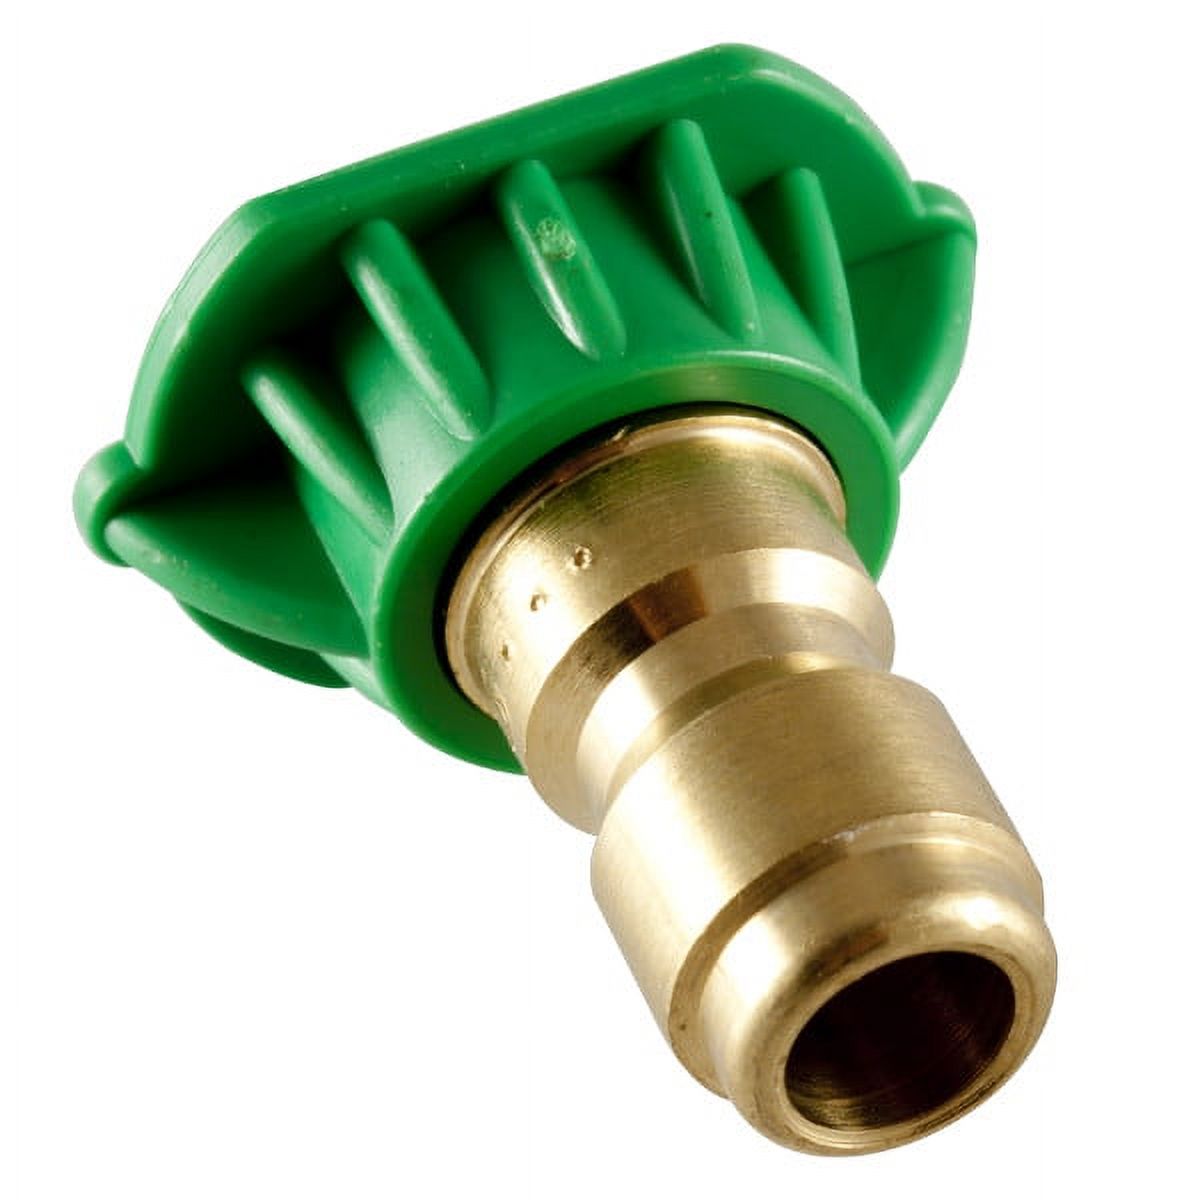 Briggs & Stratton Genuine 195983QGS NOZZLE QC GREEN Replacement Part - image 1 of 2